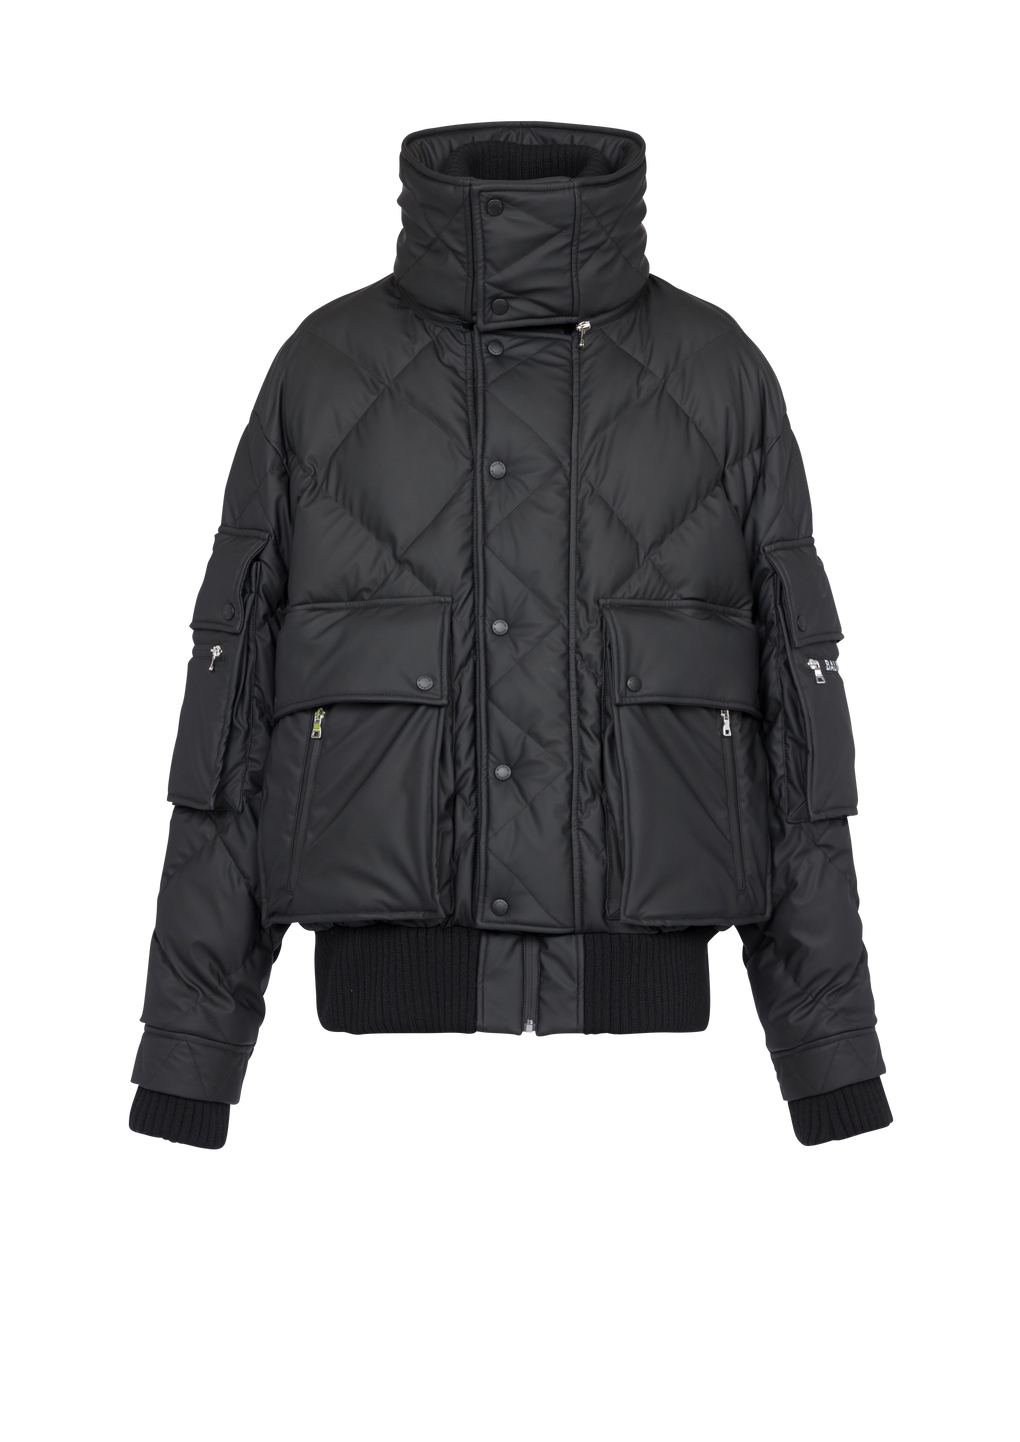 Hooded faux leather quilted jacket, black, hi-res